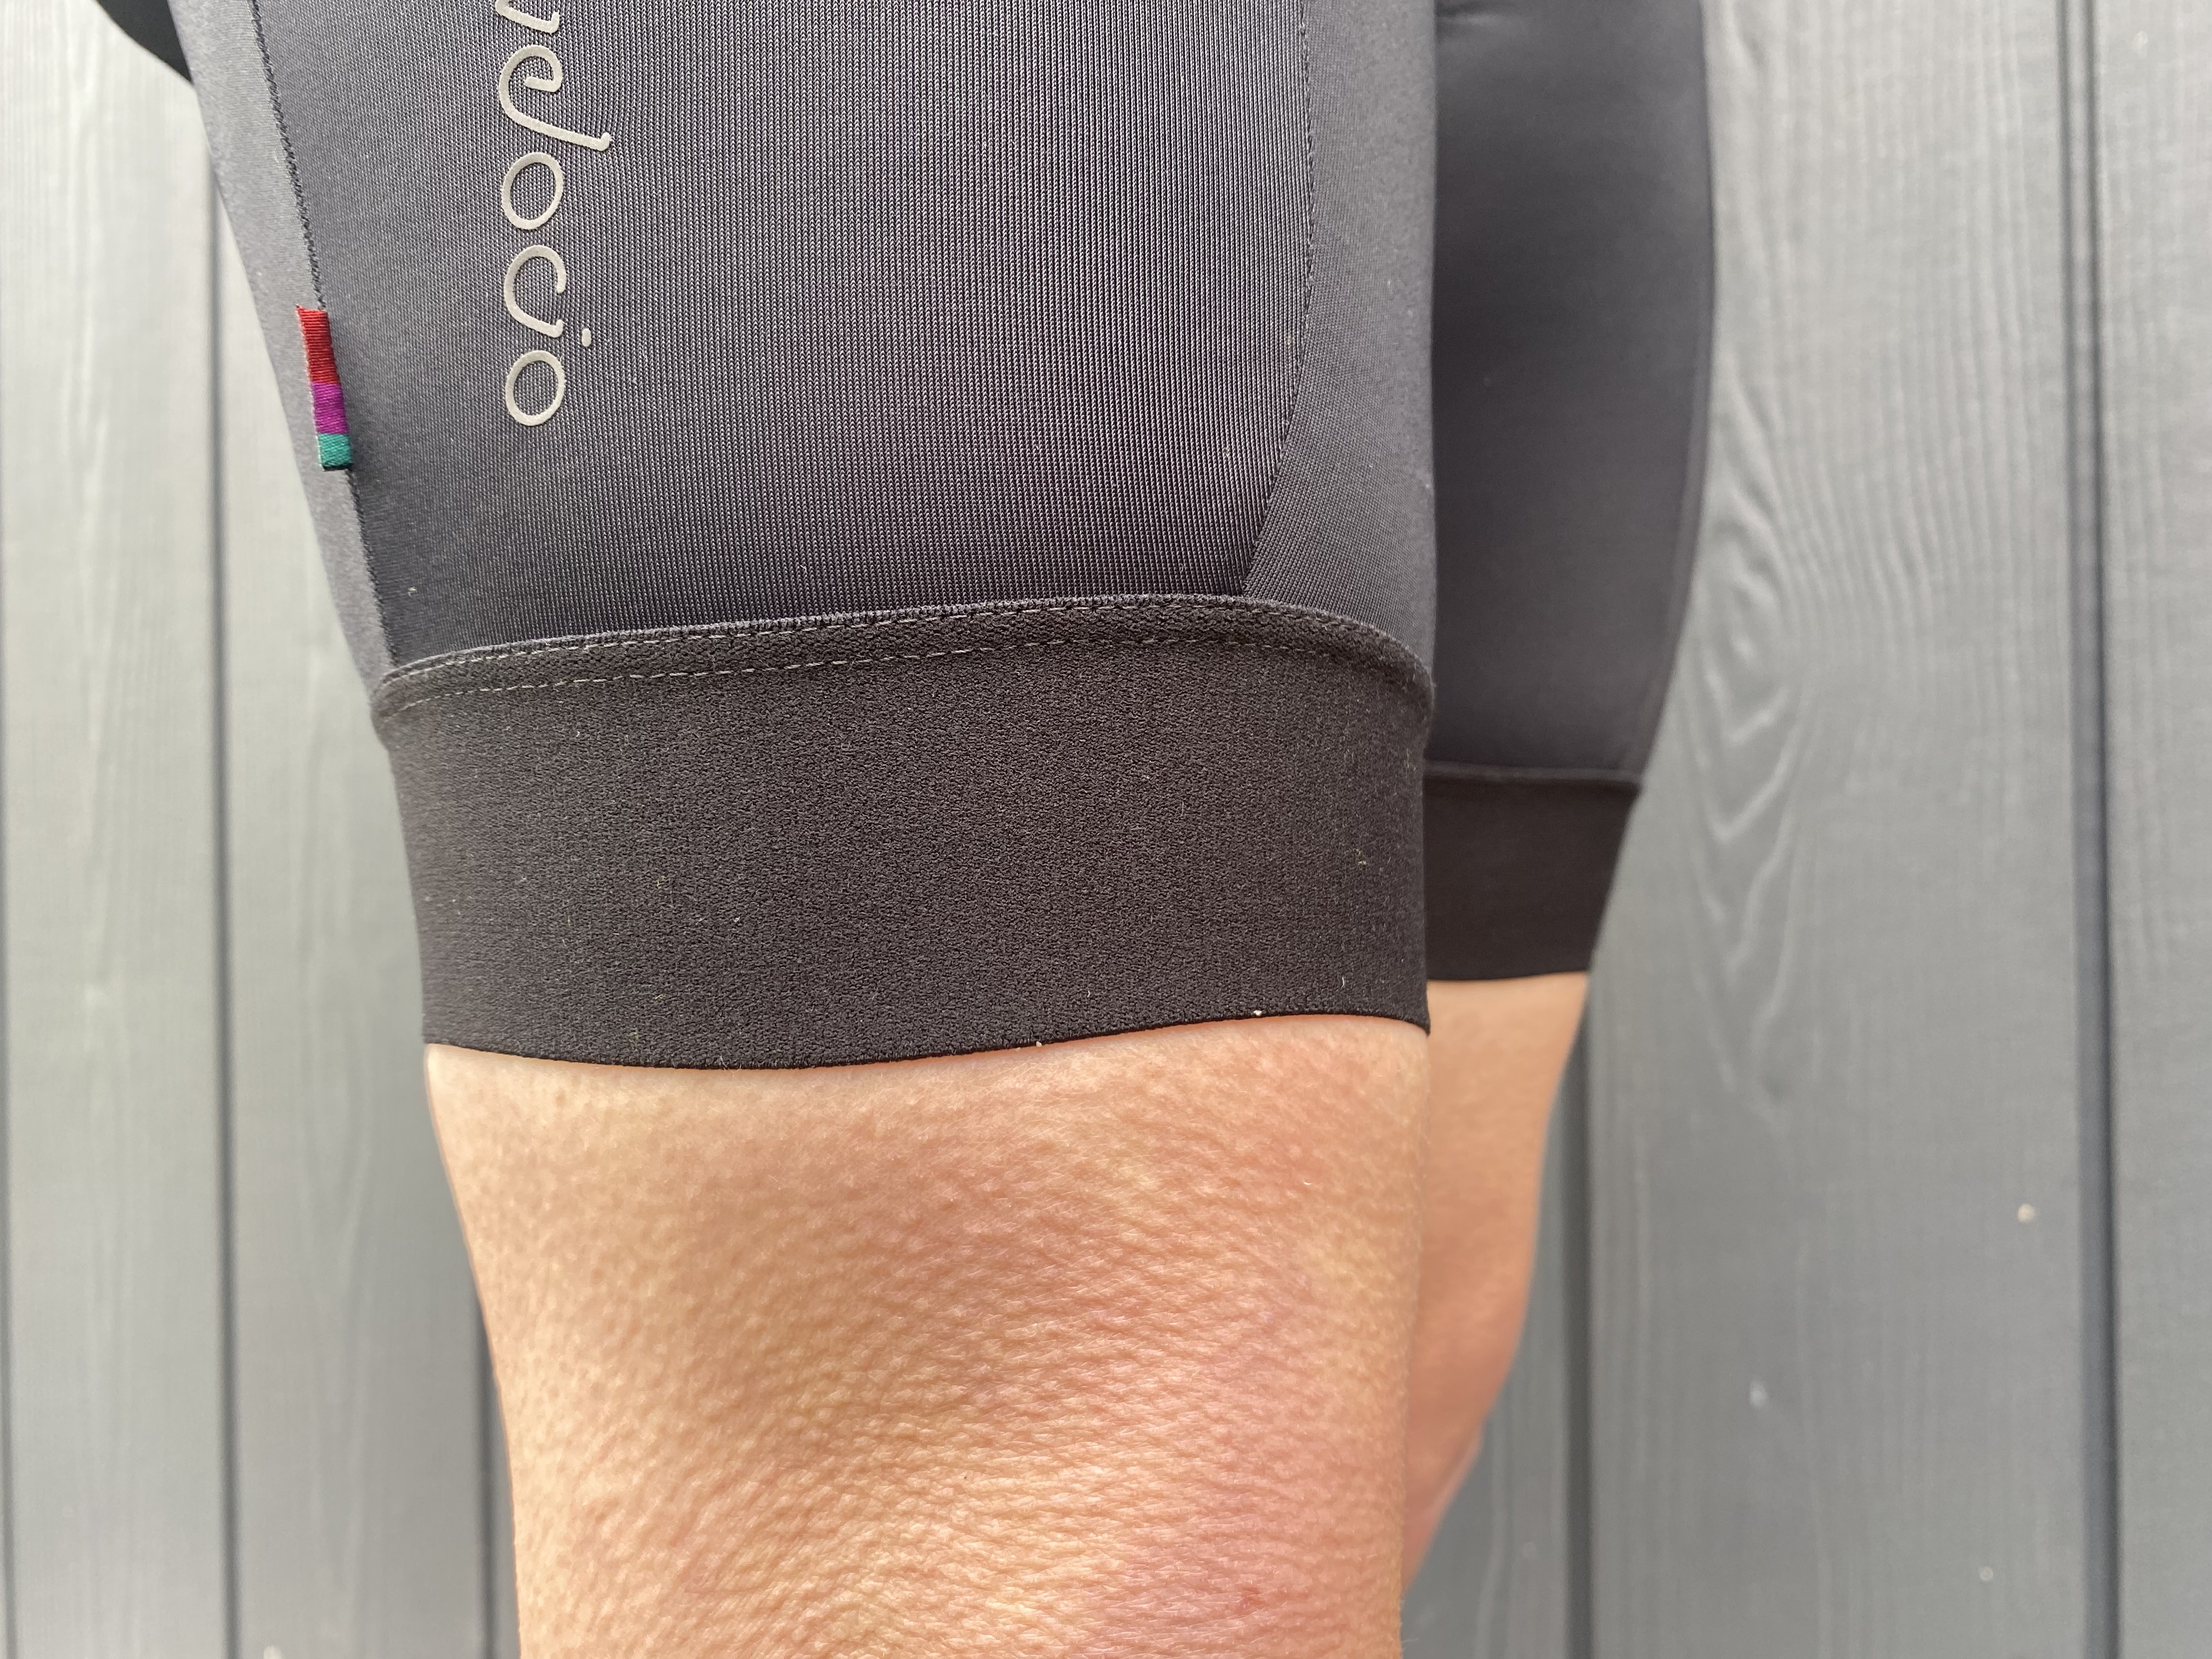 Velocio Women's Foundation Bib Short review - a lower priced option with an  easy-pee system